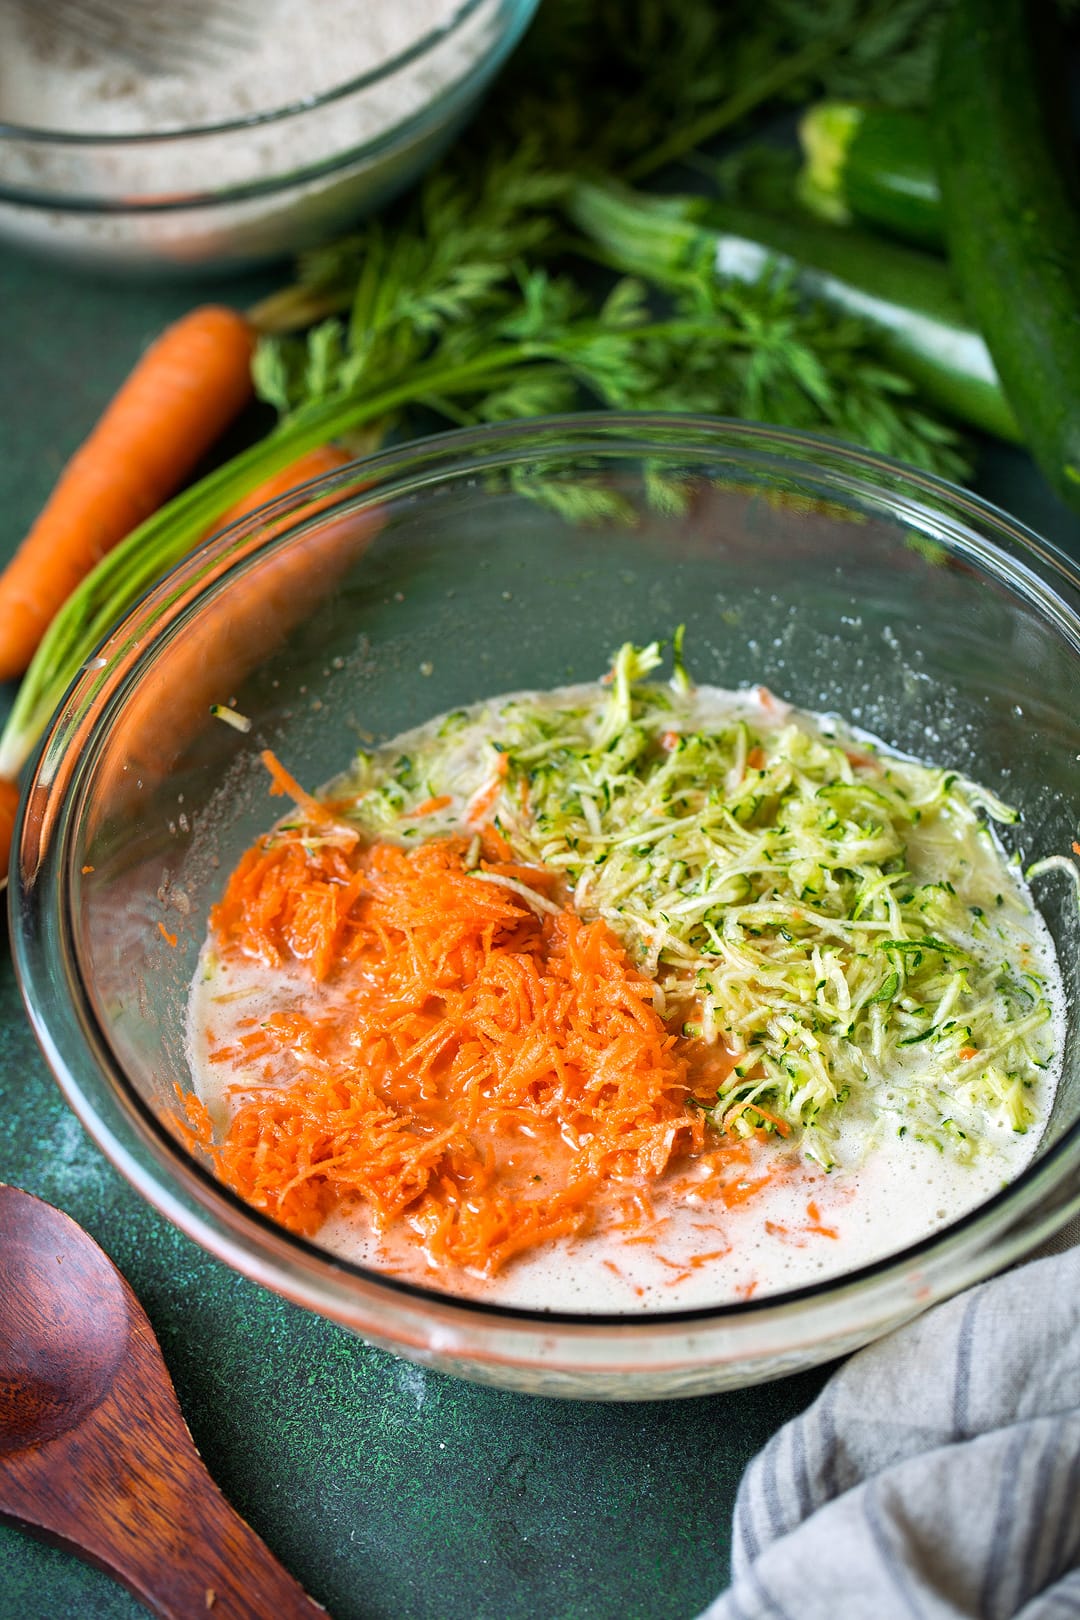 Muffins mixture with shredded zucchini and carrots in a mixing bowl.